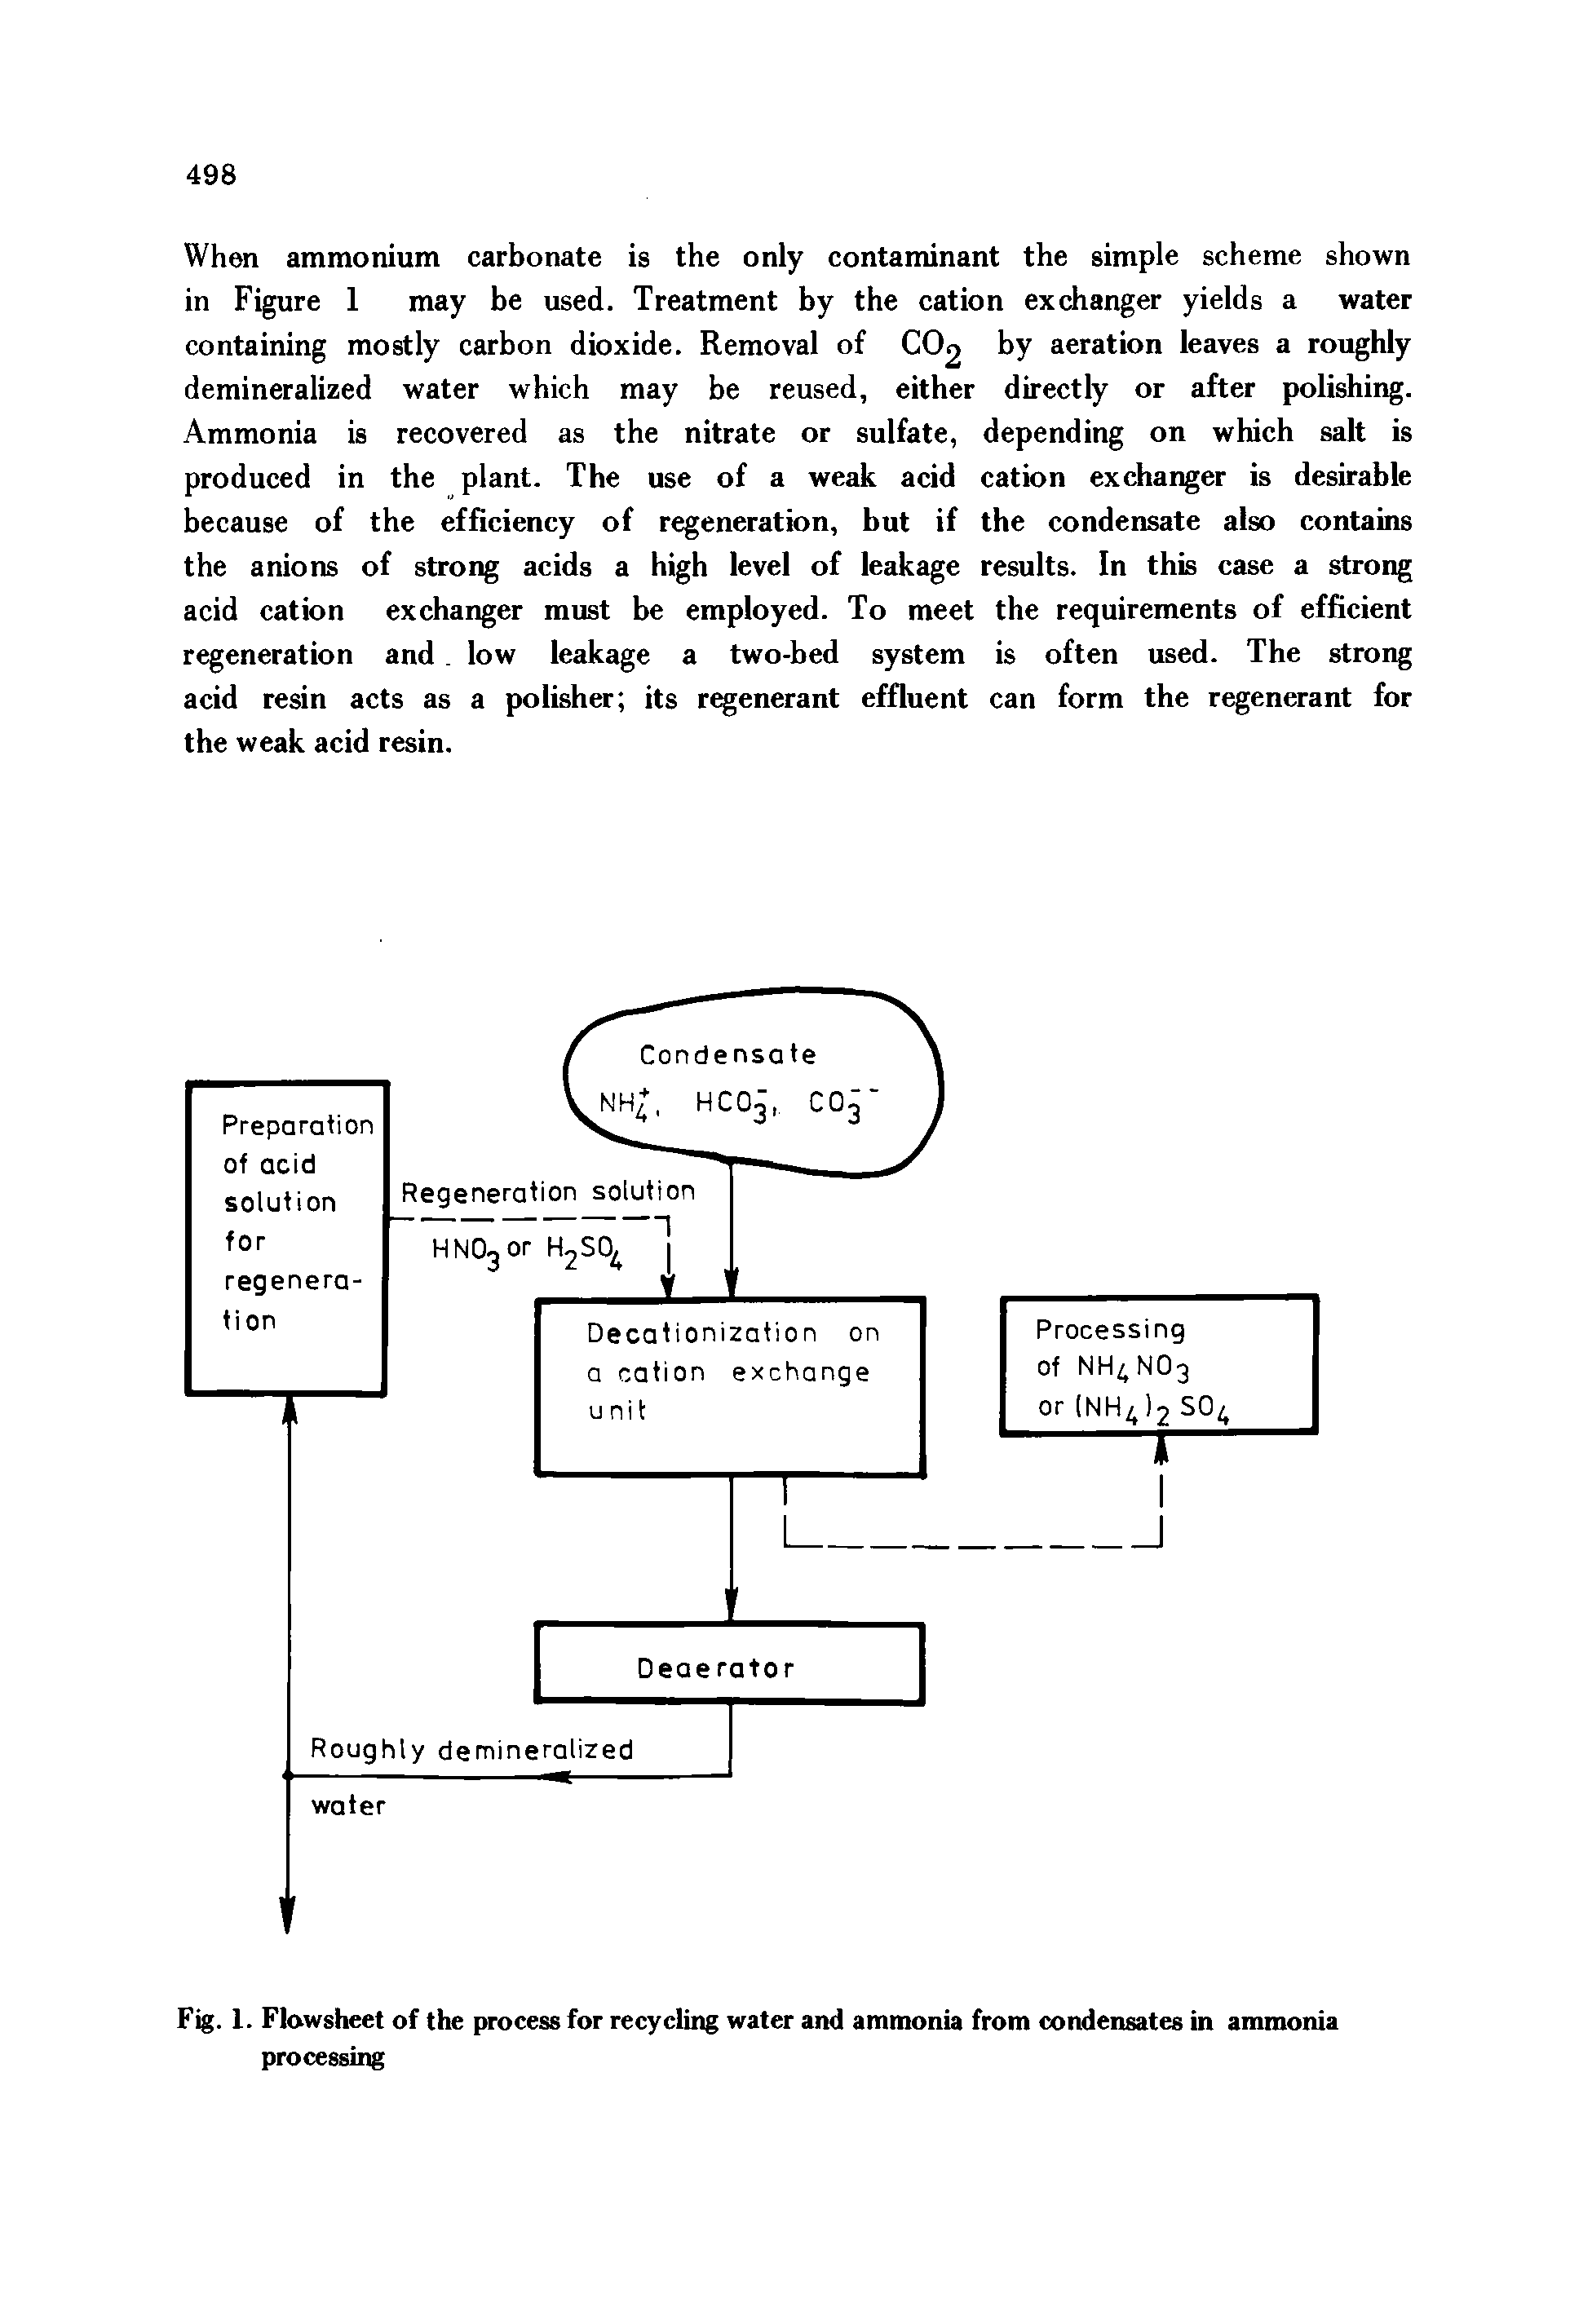 Fig. 1. Flowsheet of the process for recycling water and ammonia from condensates in ammonia processing...